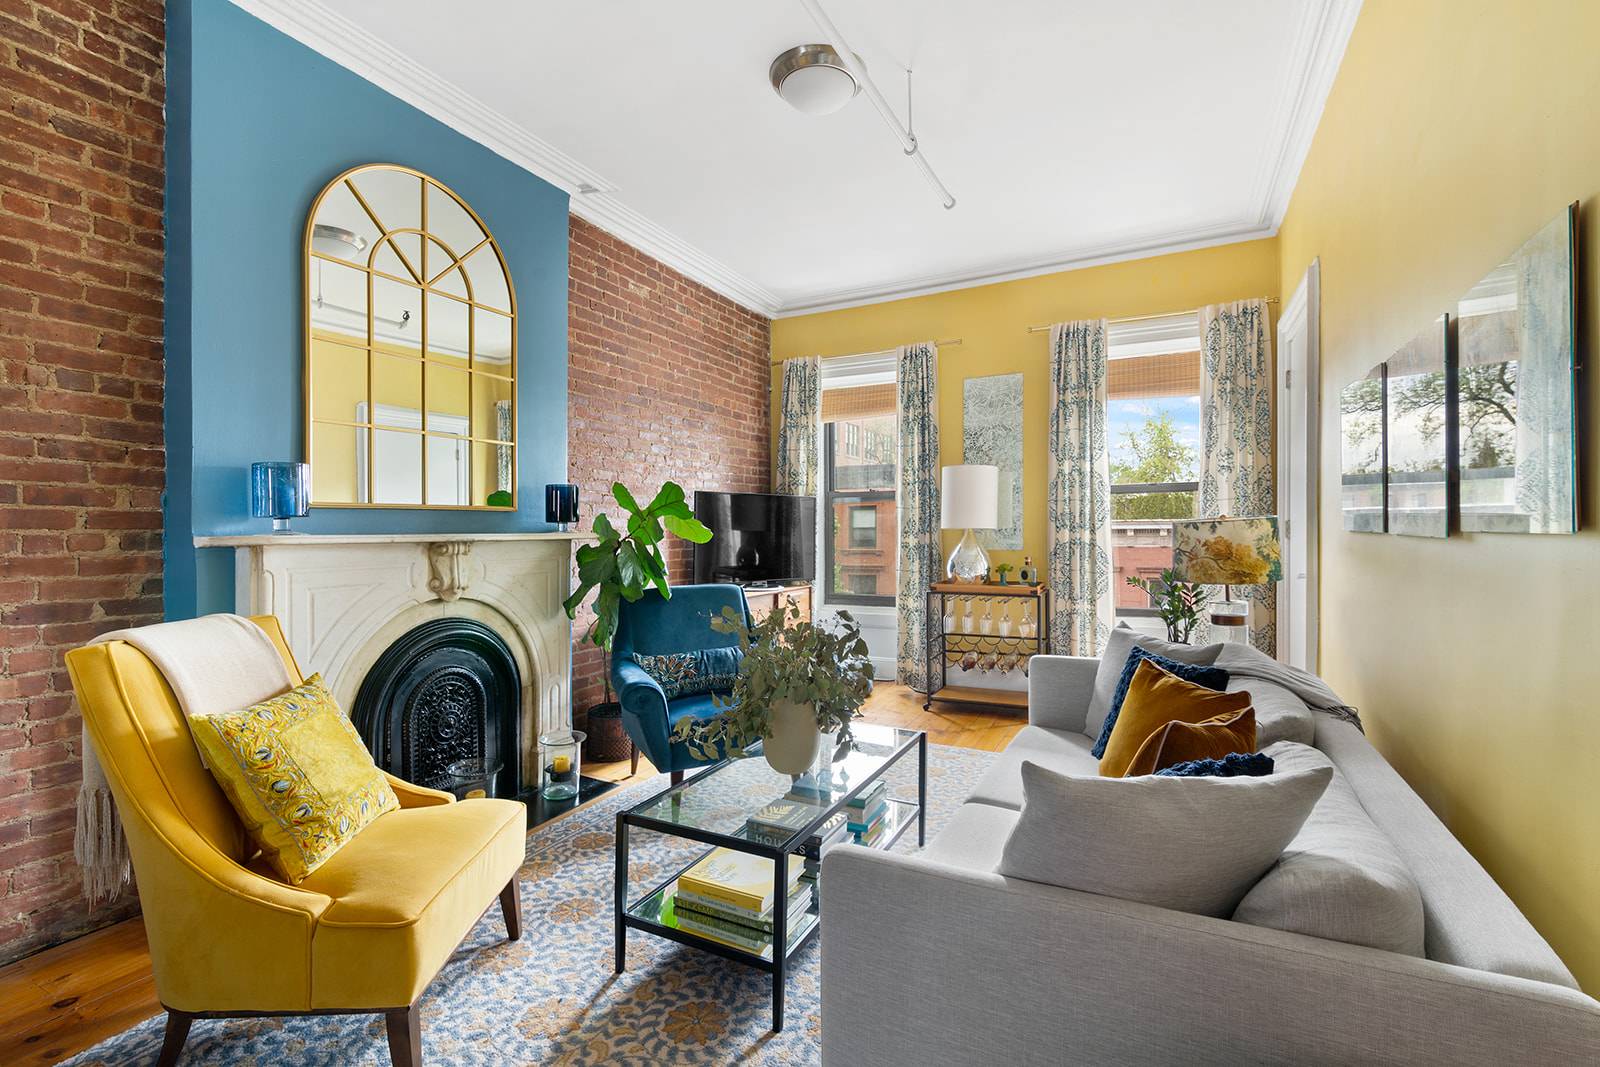 This classic Italianate brownstone is located on a prime treelined street in North Park Slope.